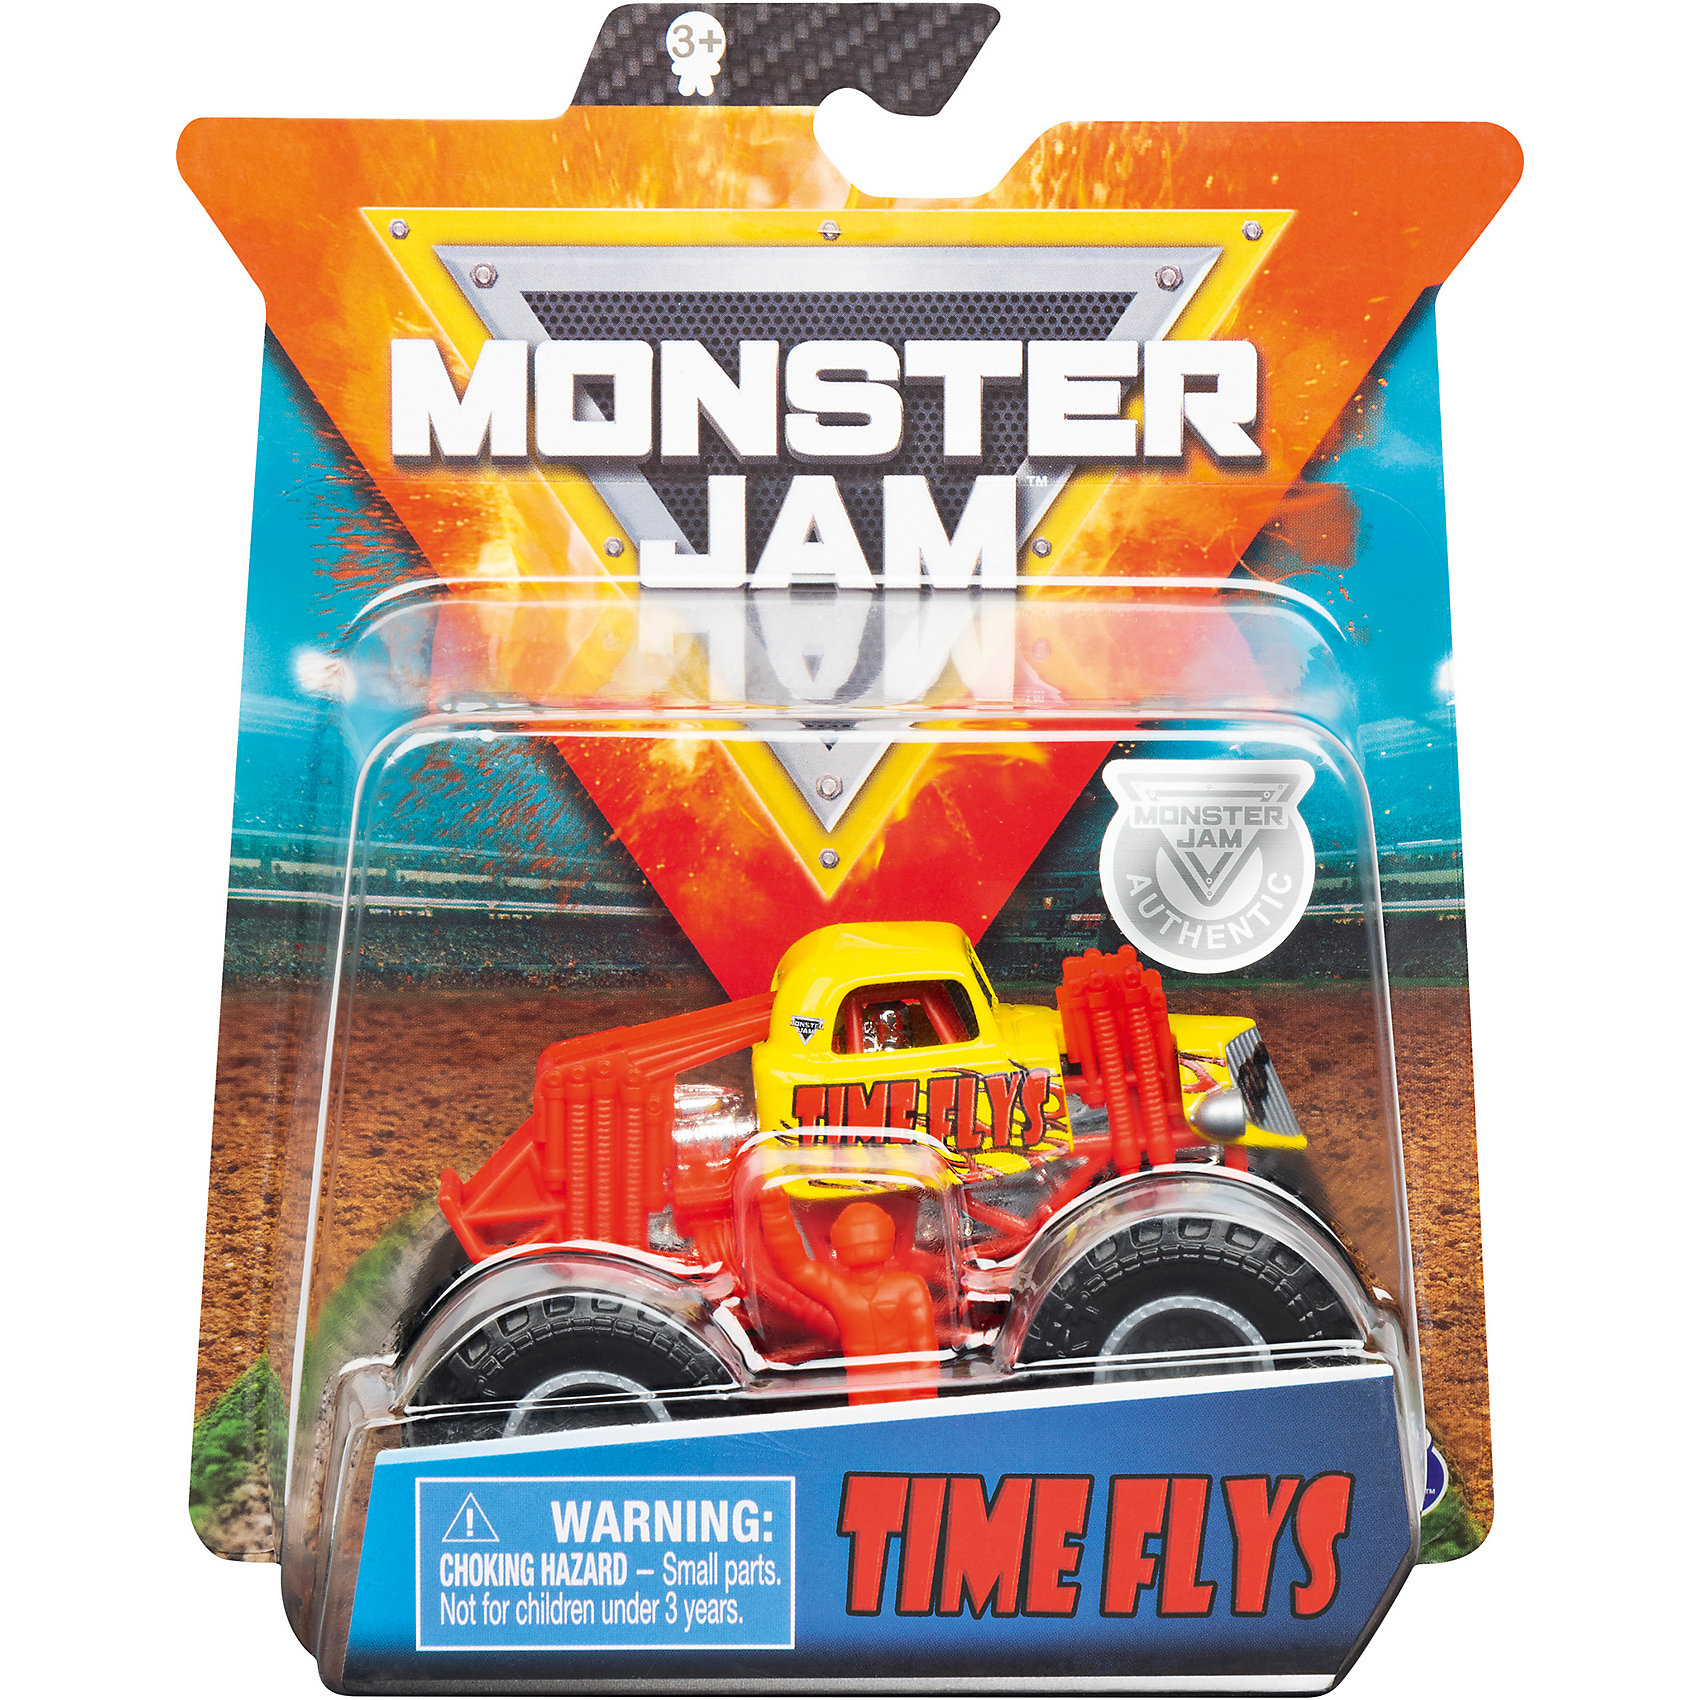 Мини-машинка Monster Jam Time flys Spin Master 14107199